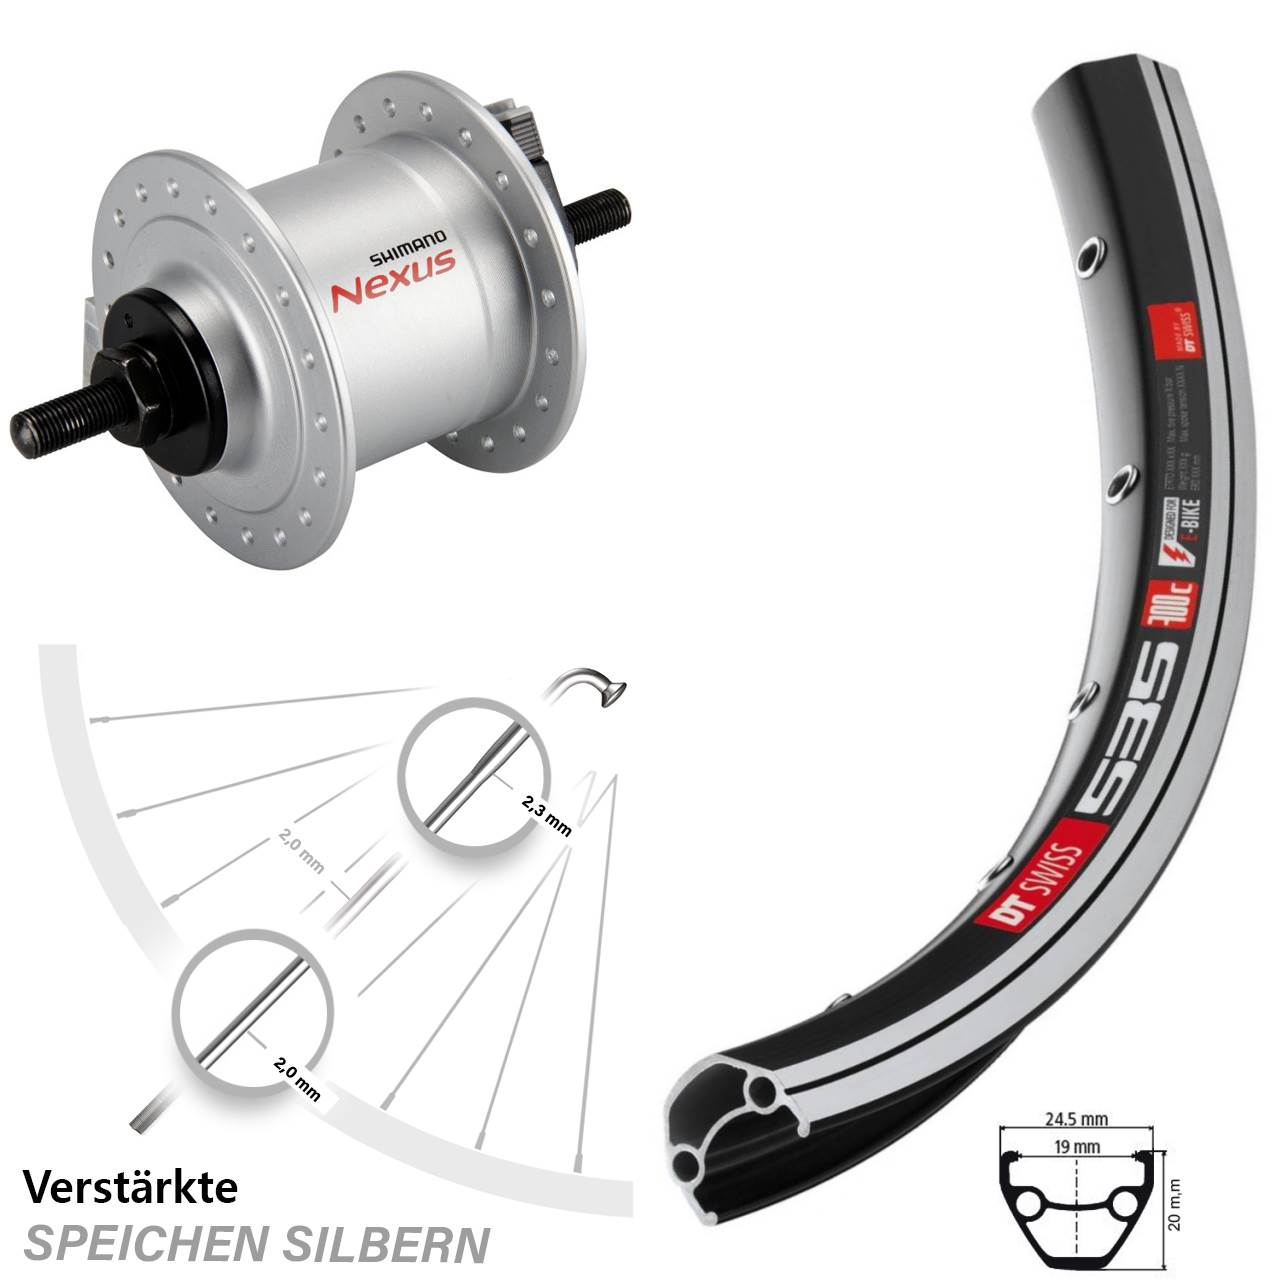 Vorderes Laufrad 28 Zoll DT Swiss 535 Shimano DH-C3000-1N